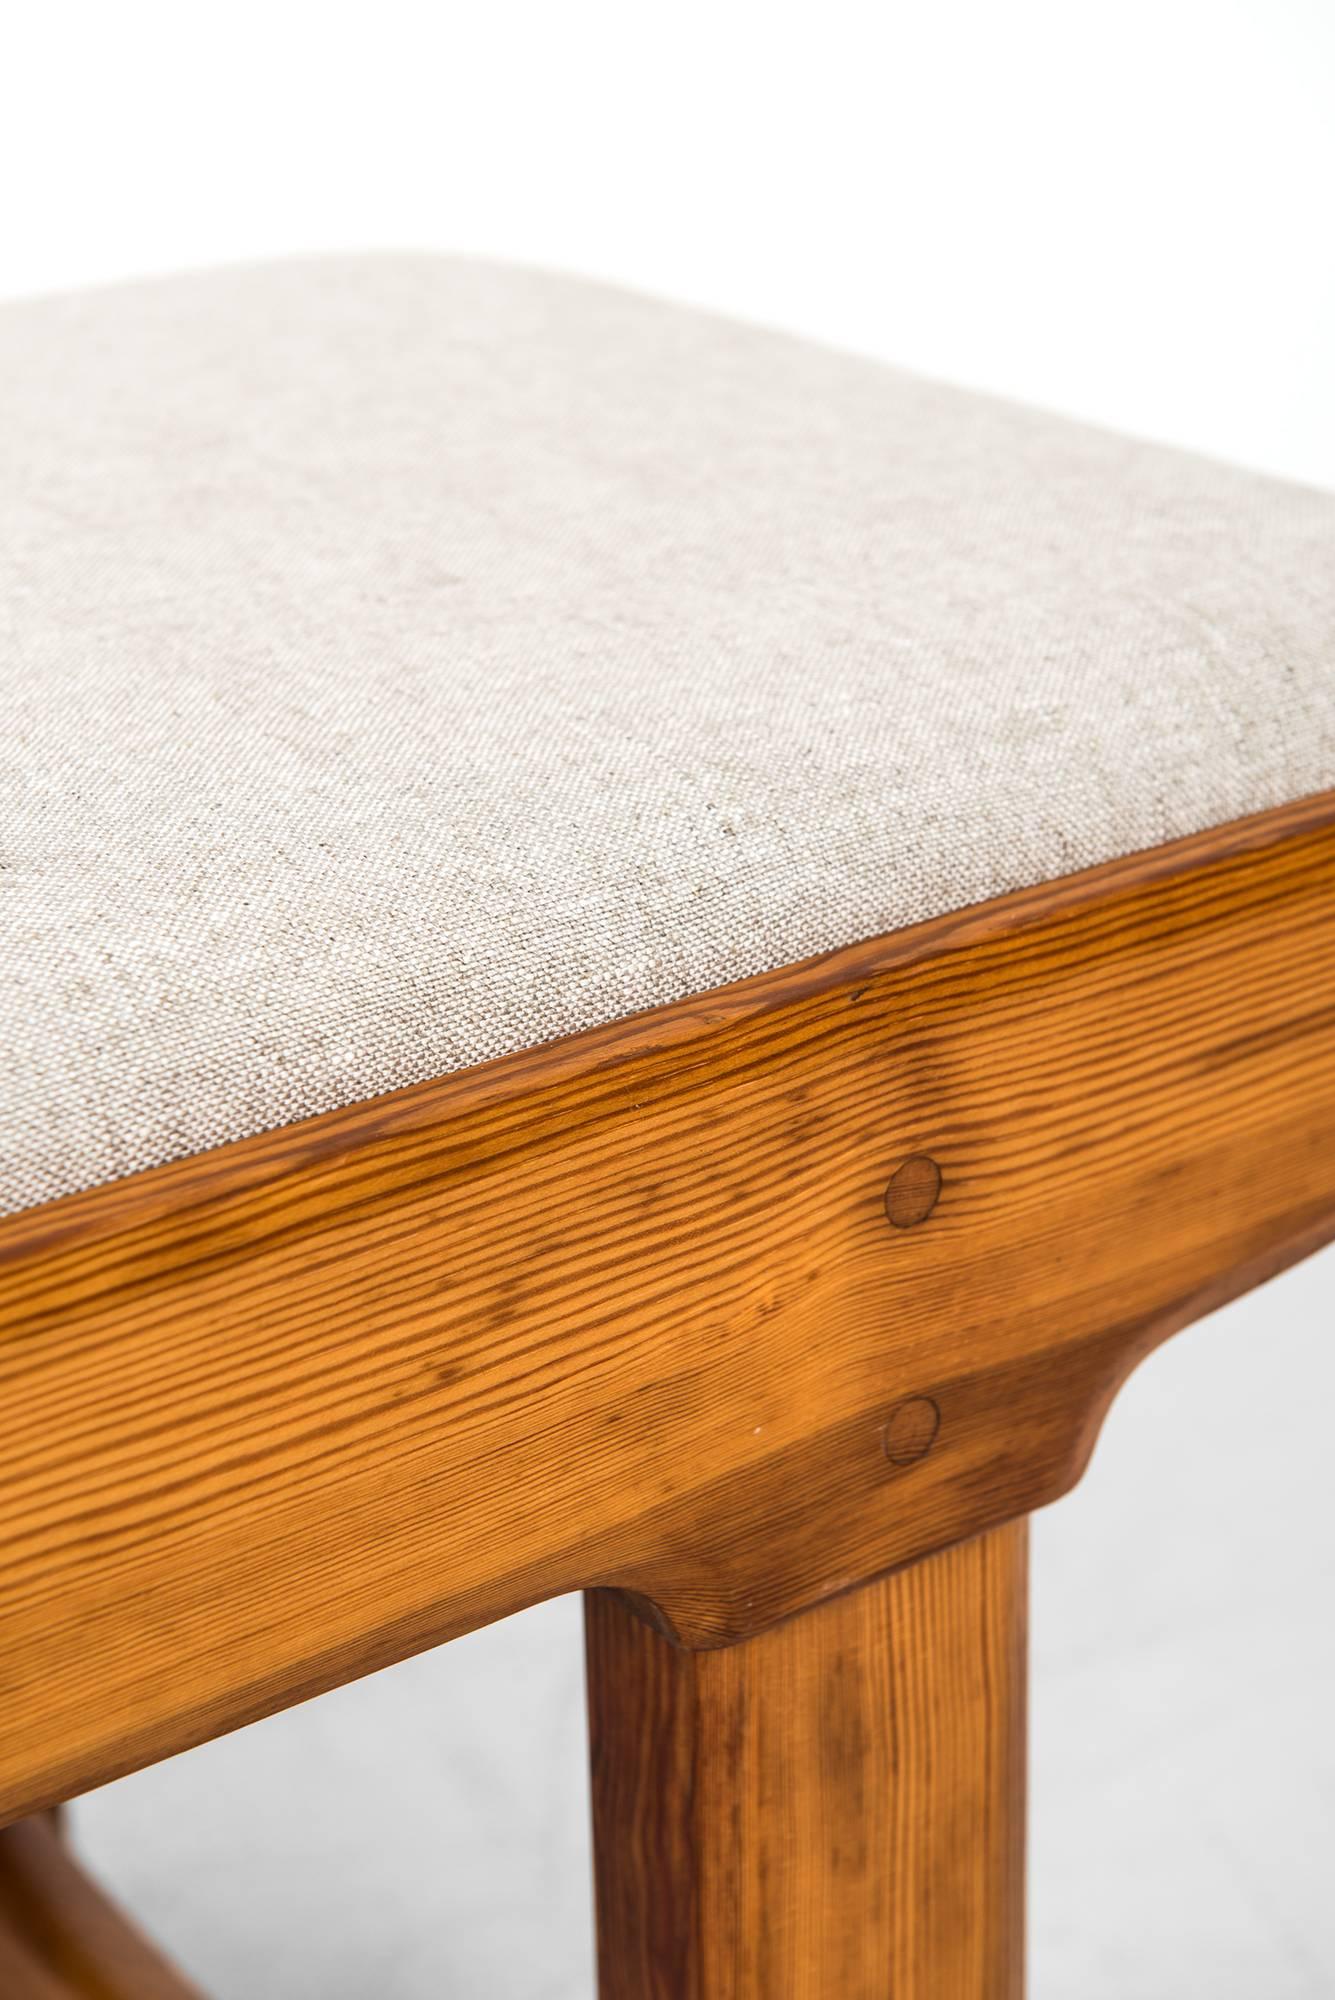 Bench in Oregon Pine and Linen Fabric Produced in Sweden 1